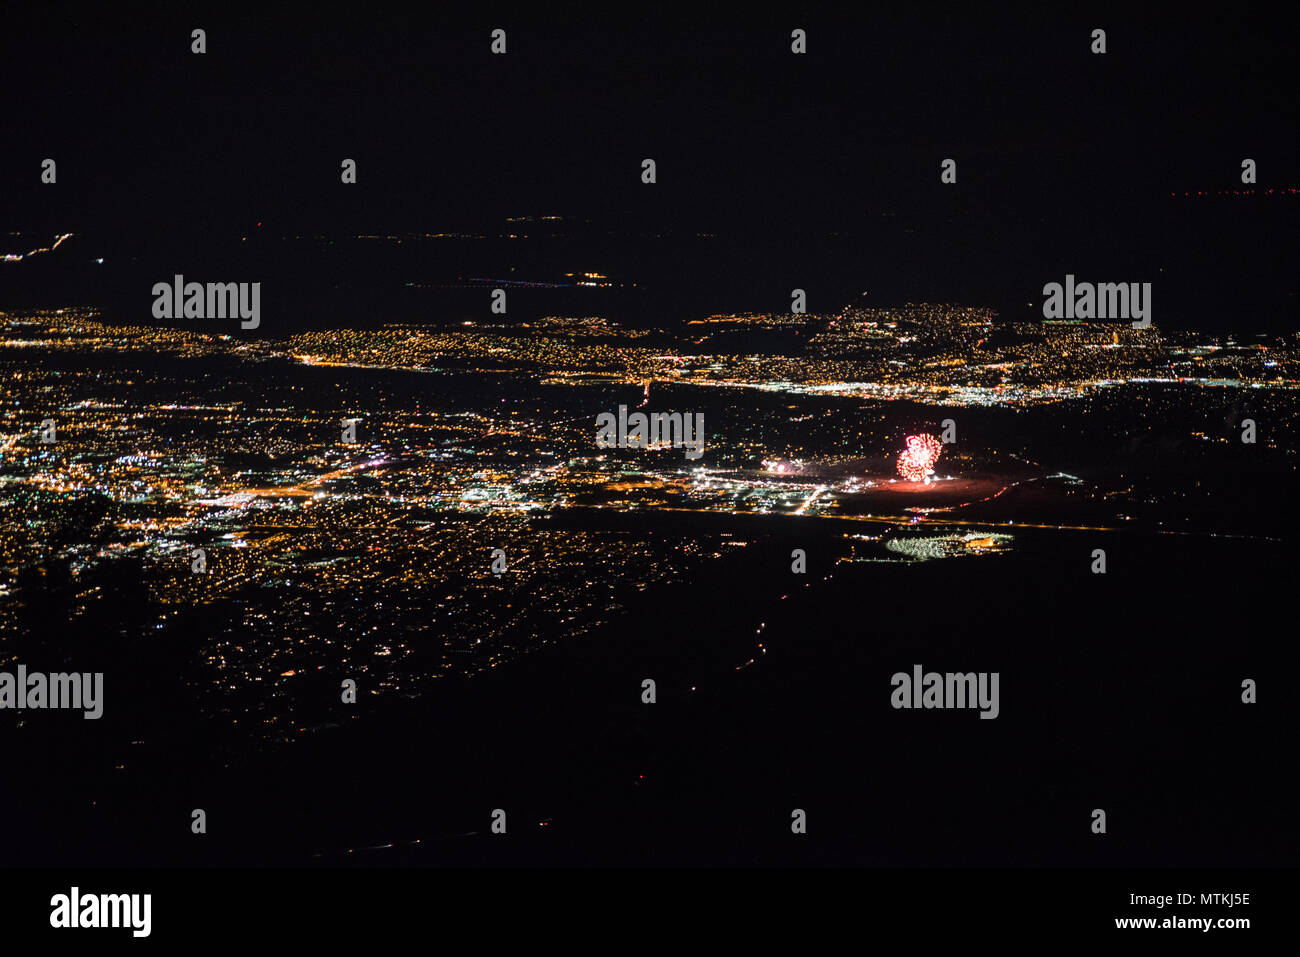 Scenic view over Albuquerque, New Mexico at night during a firework show. Stock Photo